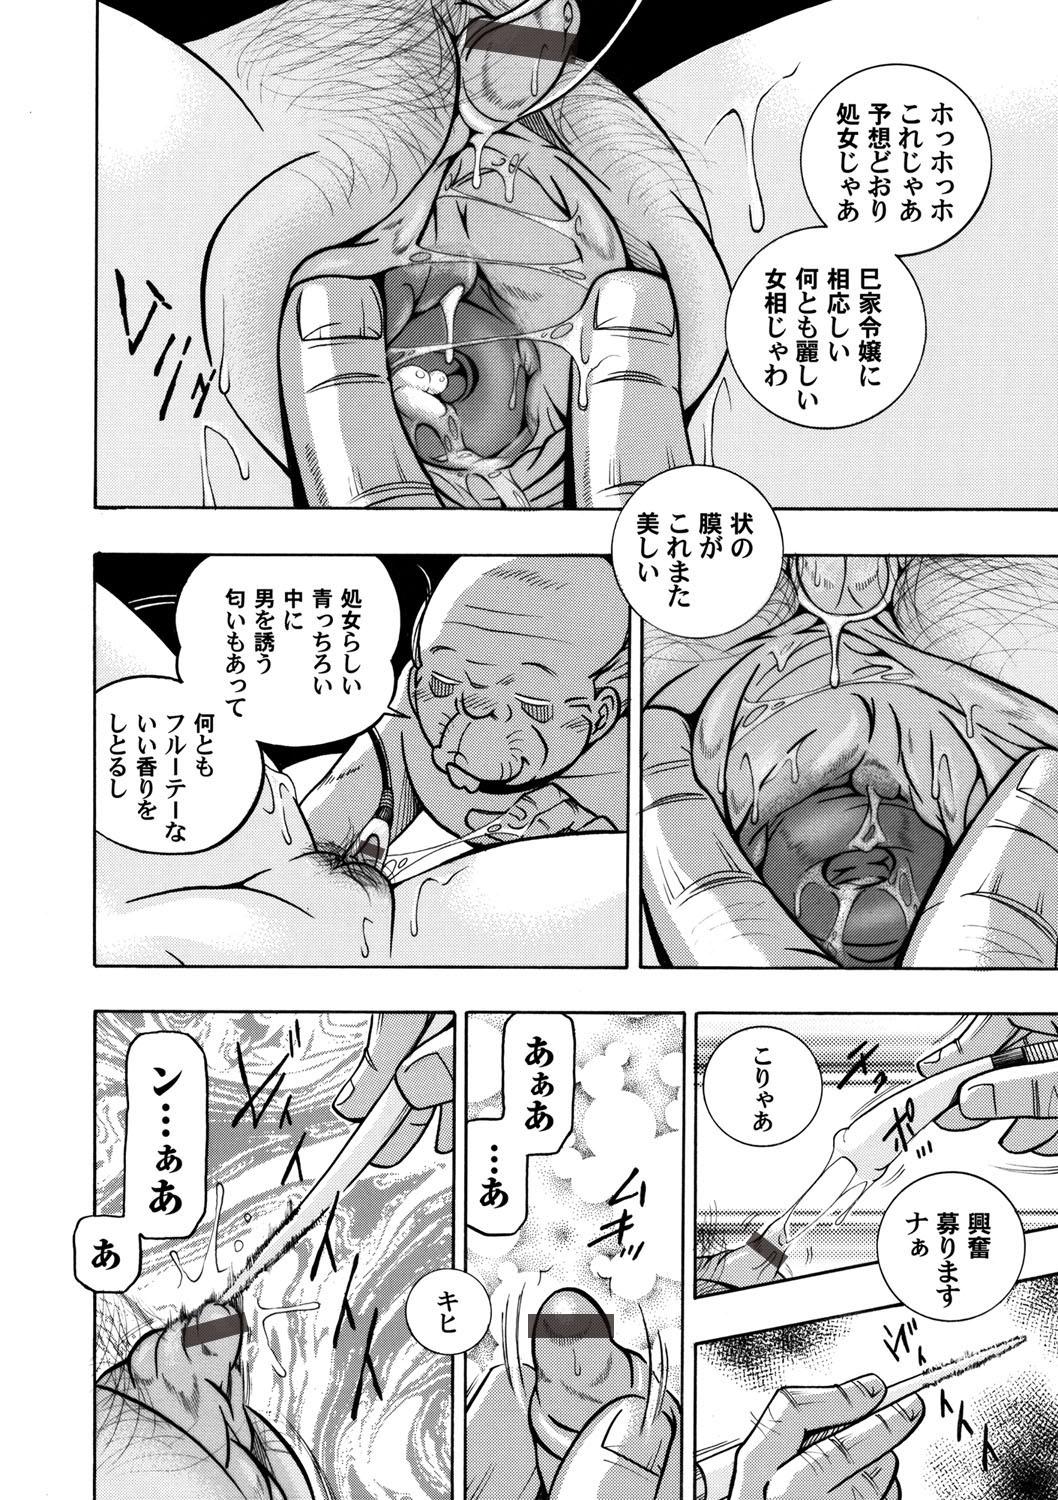 Assfingering COMIC Magnum Vol. 45 Oldvsyoung - Page 5